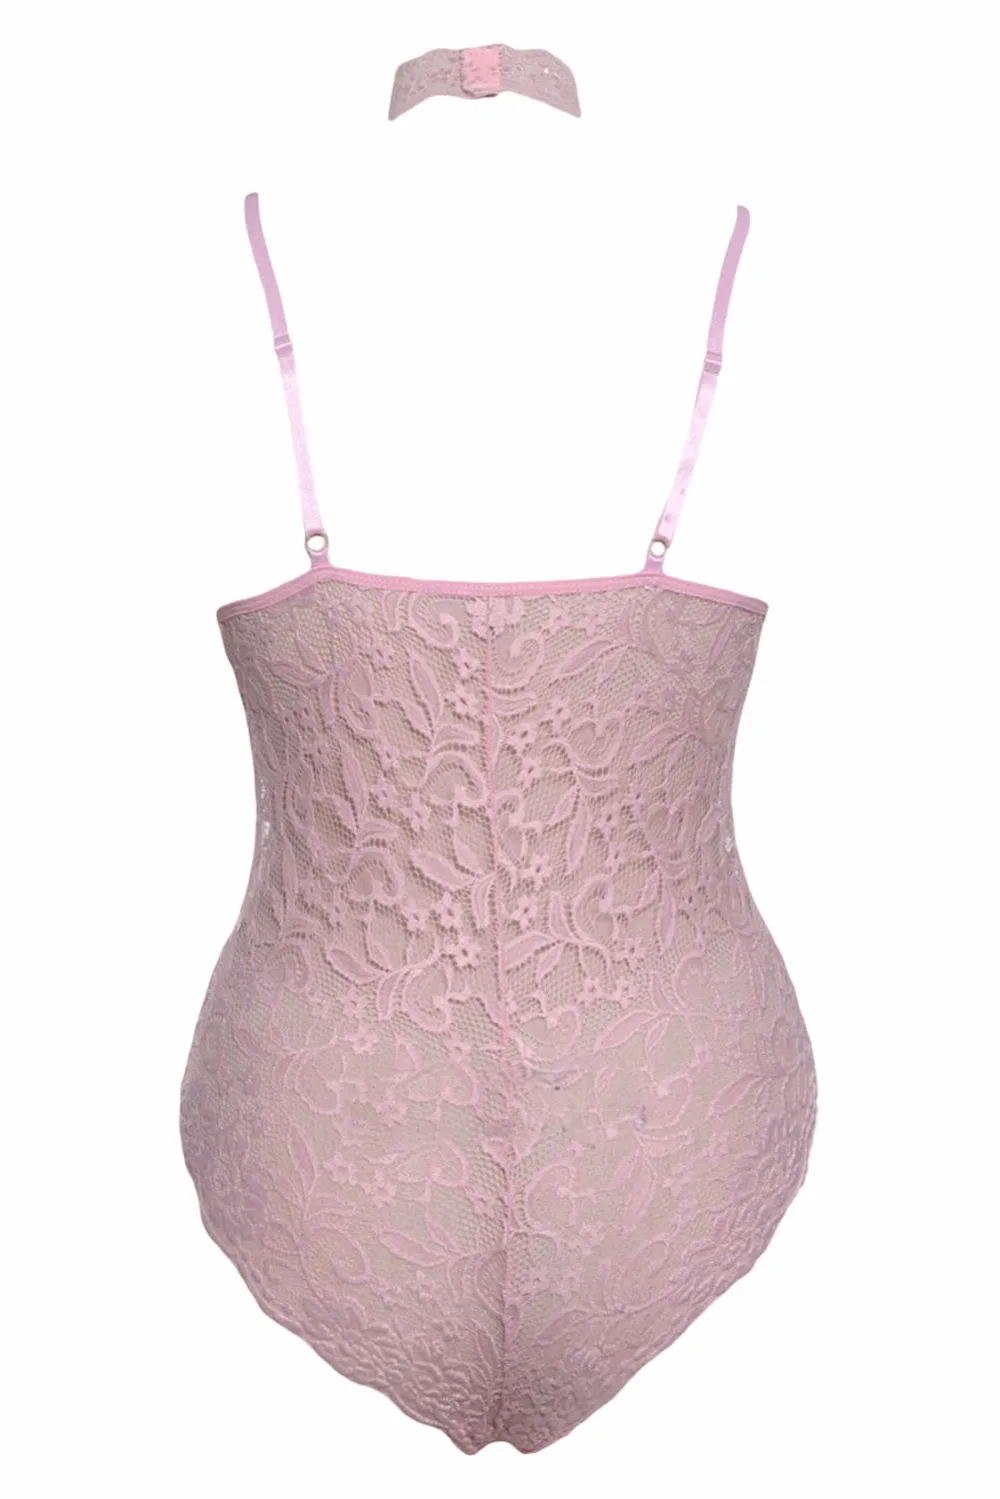 Pink-Sheer-Lace-Choker-Neck-Teddy-Lingerie-LC32139-10-3